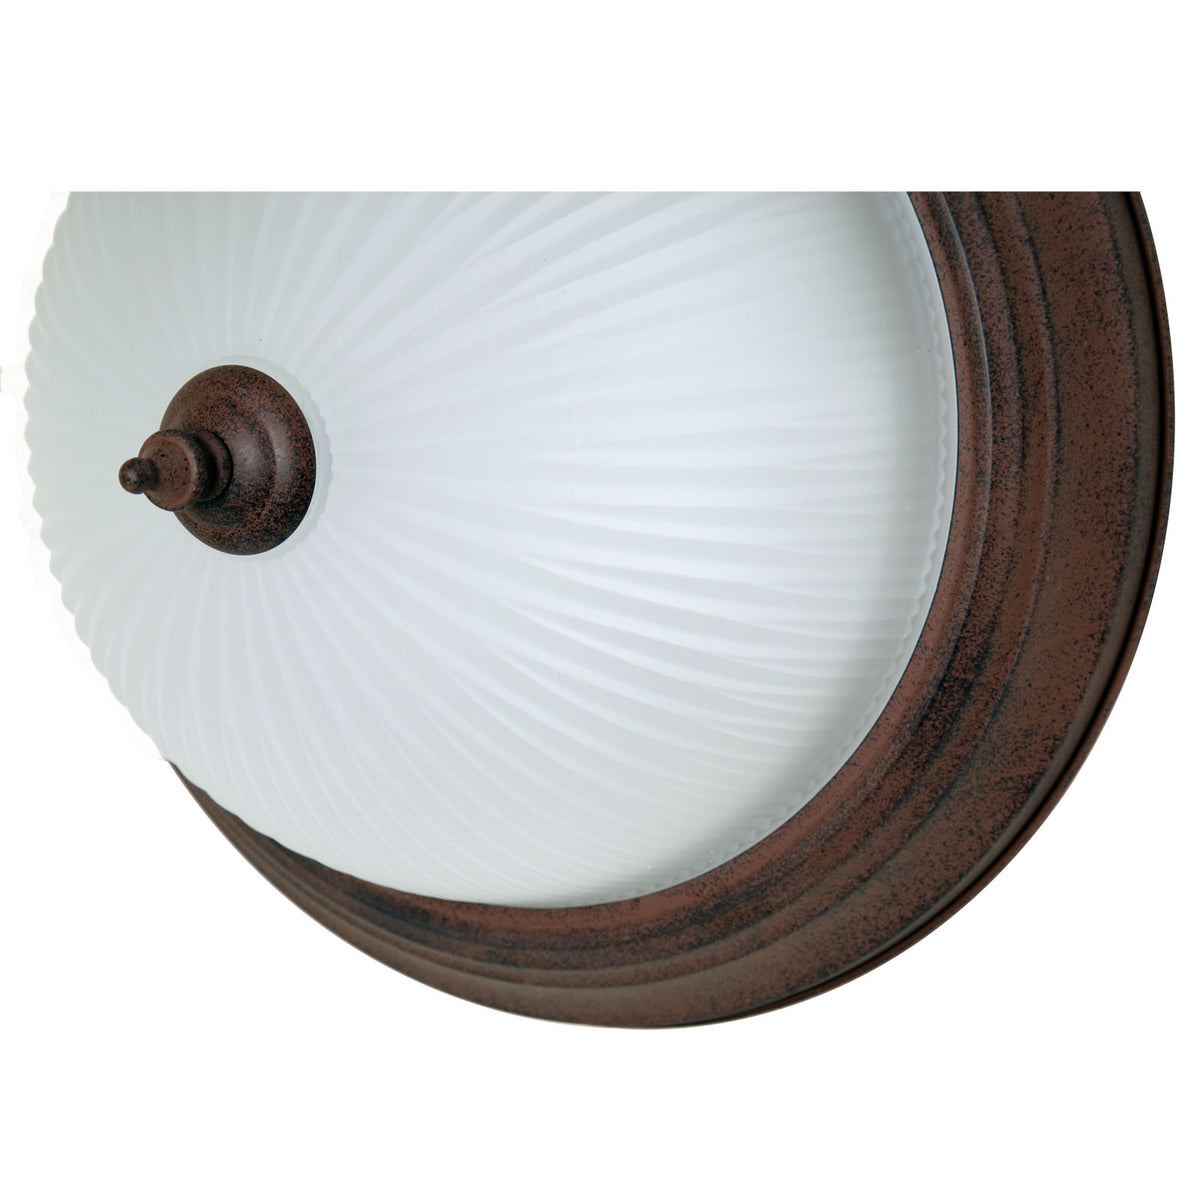 buy ceiling light fixtures at cheap rate in bulk. wholesale & retail commercial lighting supplies store. home décor ideas, maintenance, repair replacement parts